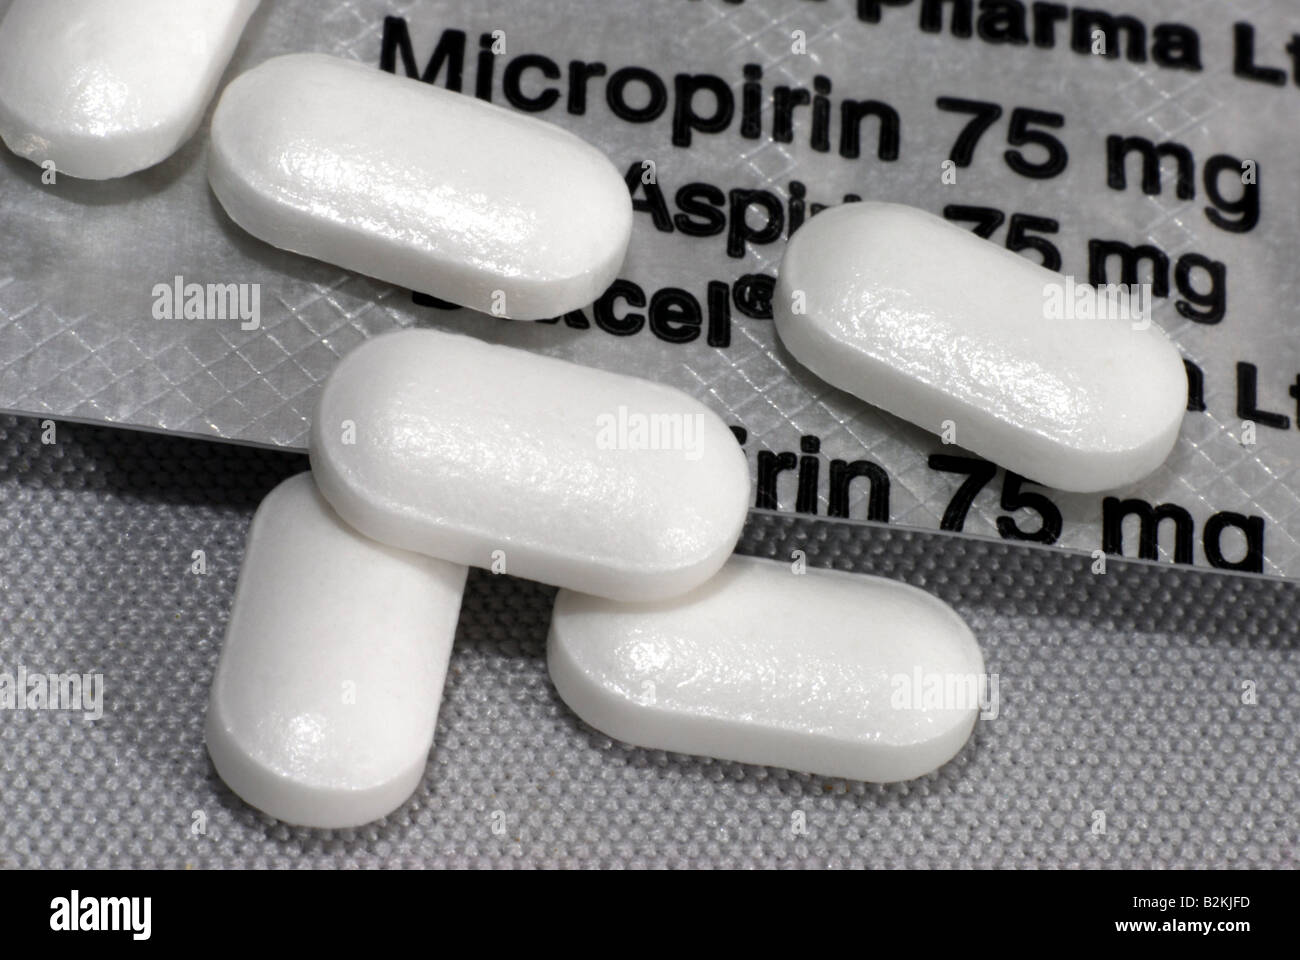 generic pack shot of Micropirin enteric coated tablets also known as  aspirin or non steroidal anti inflammatory drugs Stock Photo - Alamy